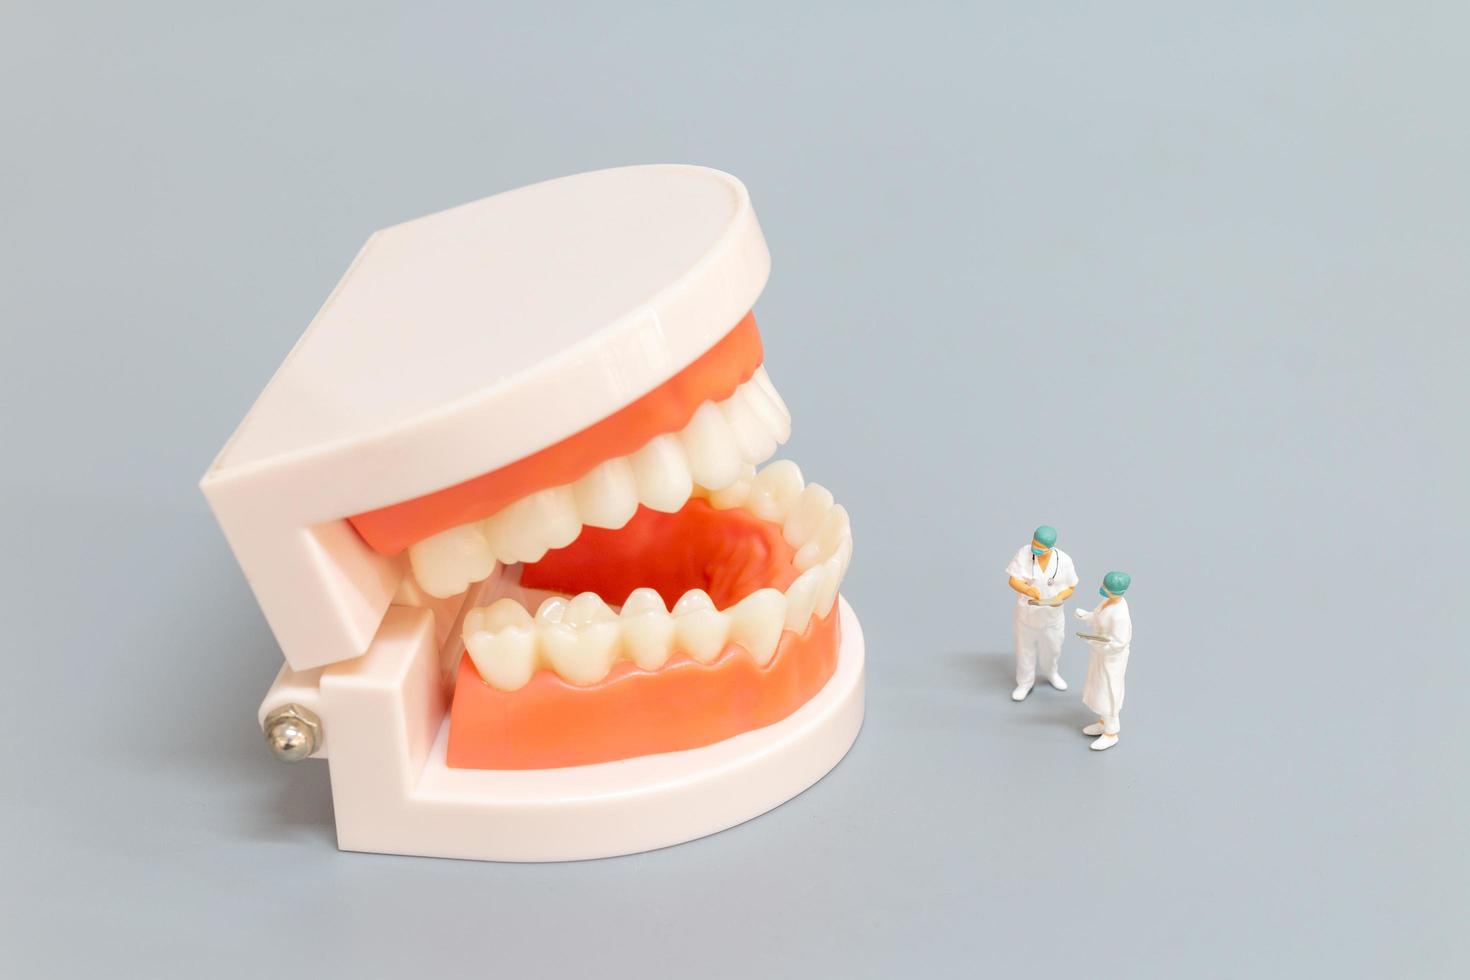 Miniature dentist repairing human teeth with gums and enamel, health and medical concept photo